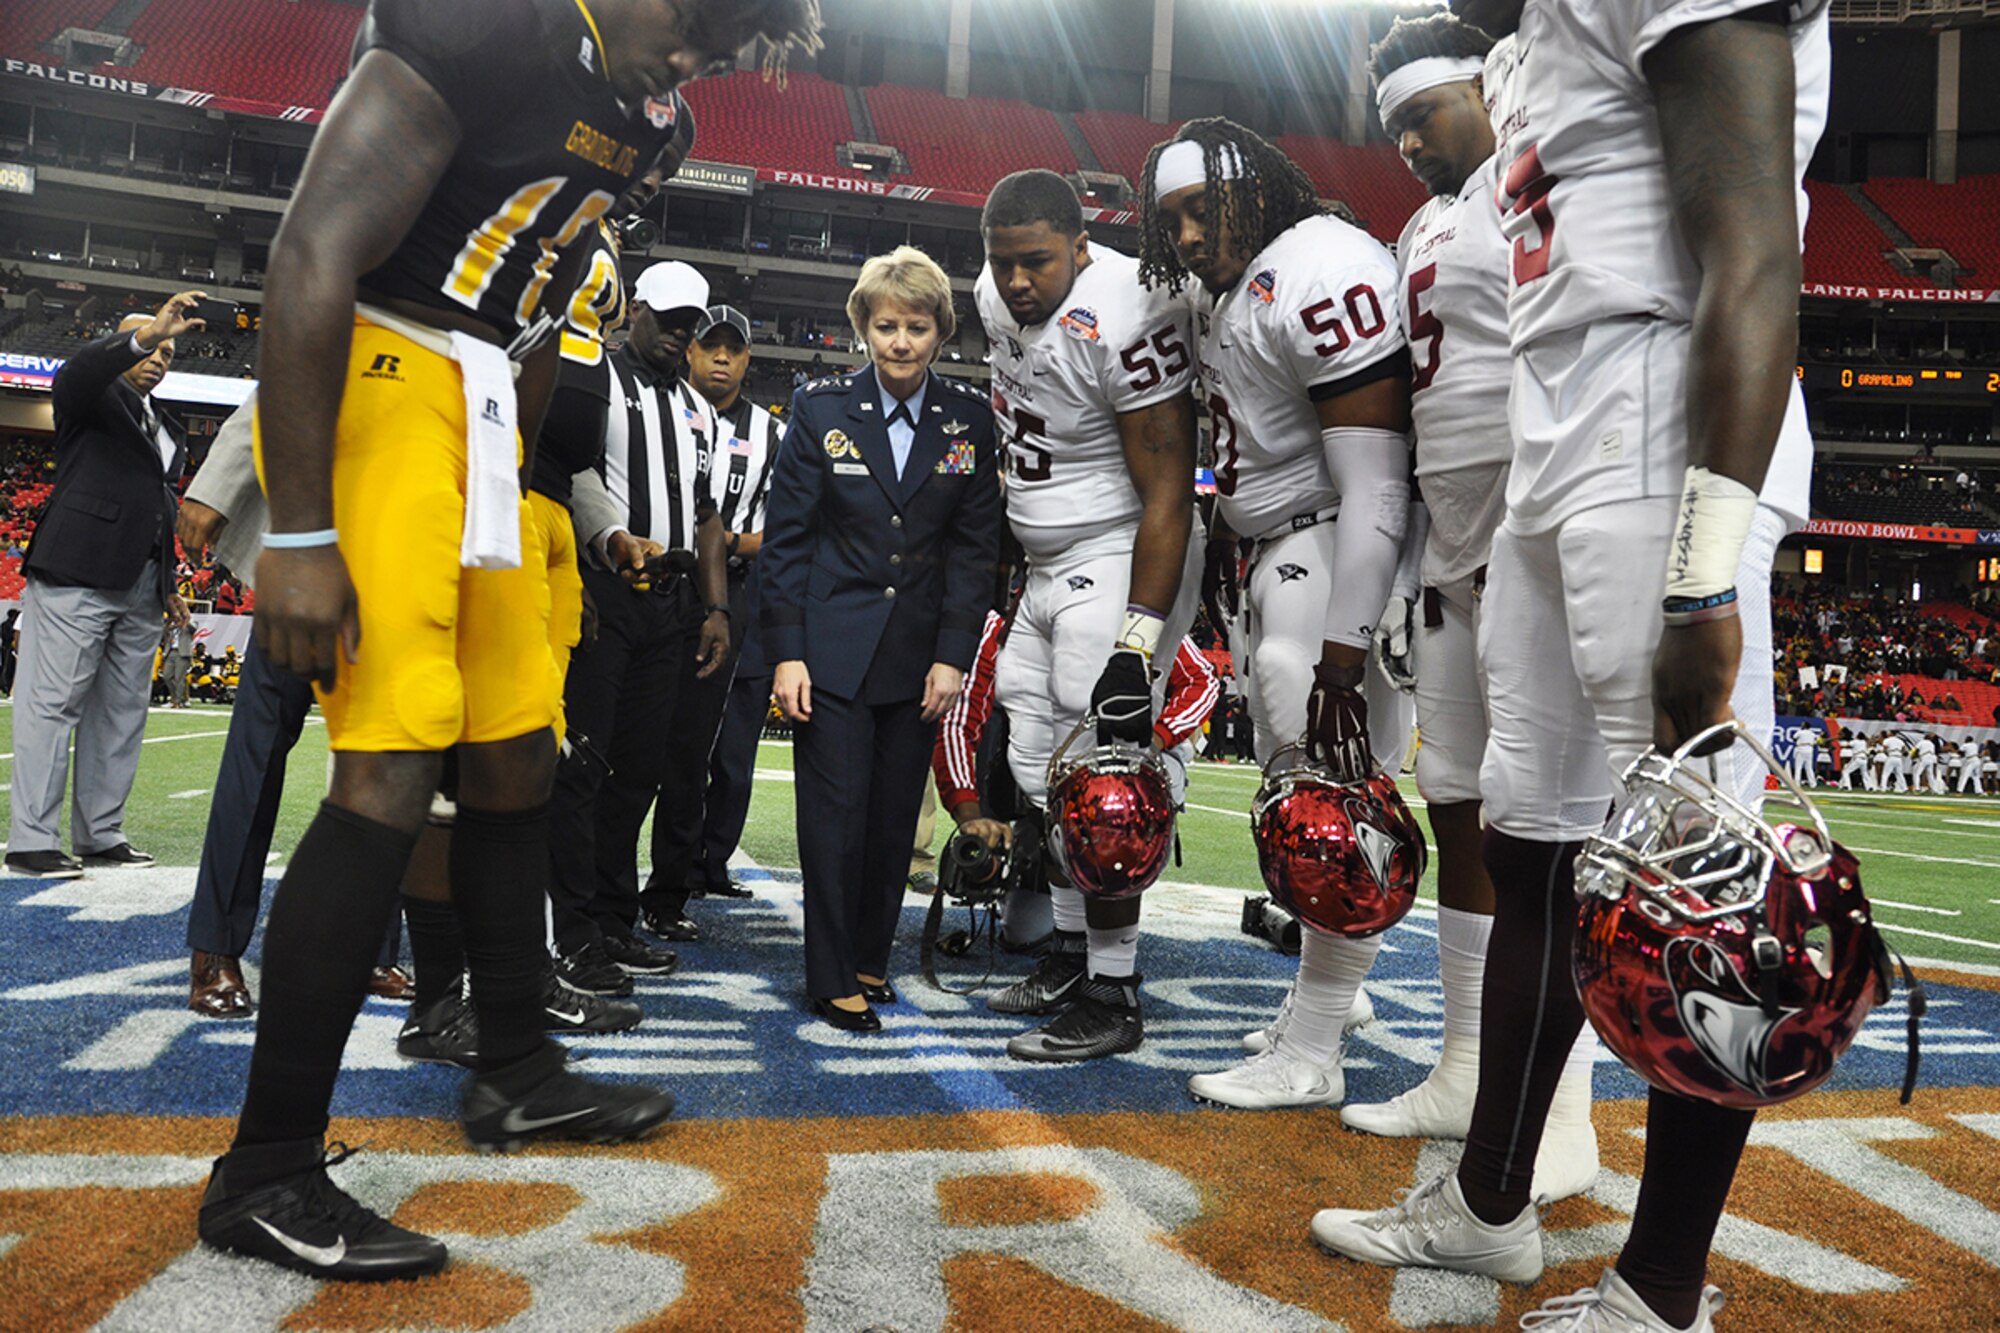 Lt. Gen. Maryanne Miller, chief of the Air Force Reserve and commander of Air Force Reserve Command, conducts the coin toss prior to the Air Force Reserve Celebration Bowl football game between the Grambling State University Tigers and the North Carolina Central University Eagles.  (U.S. Air Force photo/Master Sgt. James Branch)